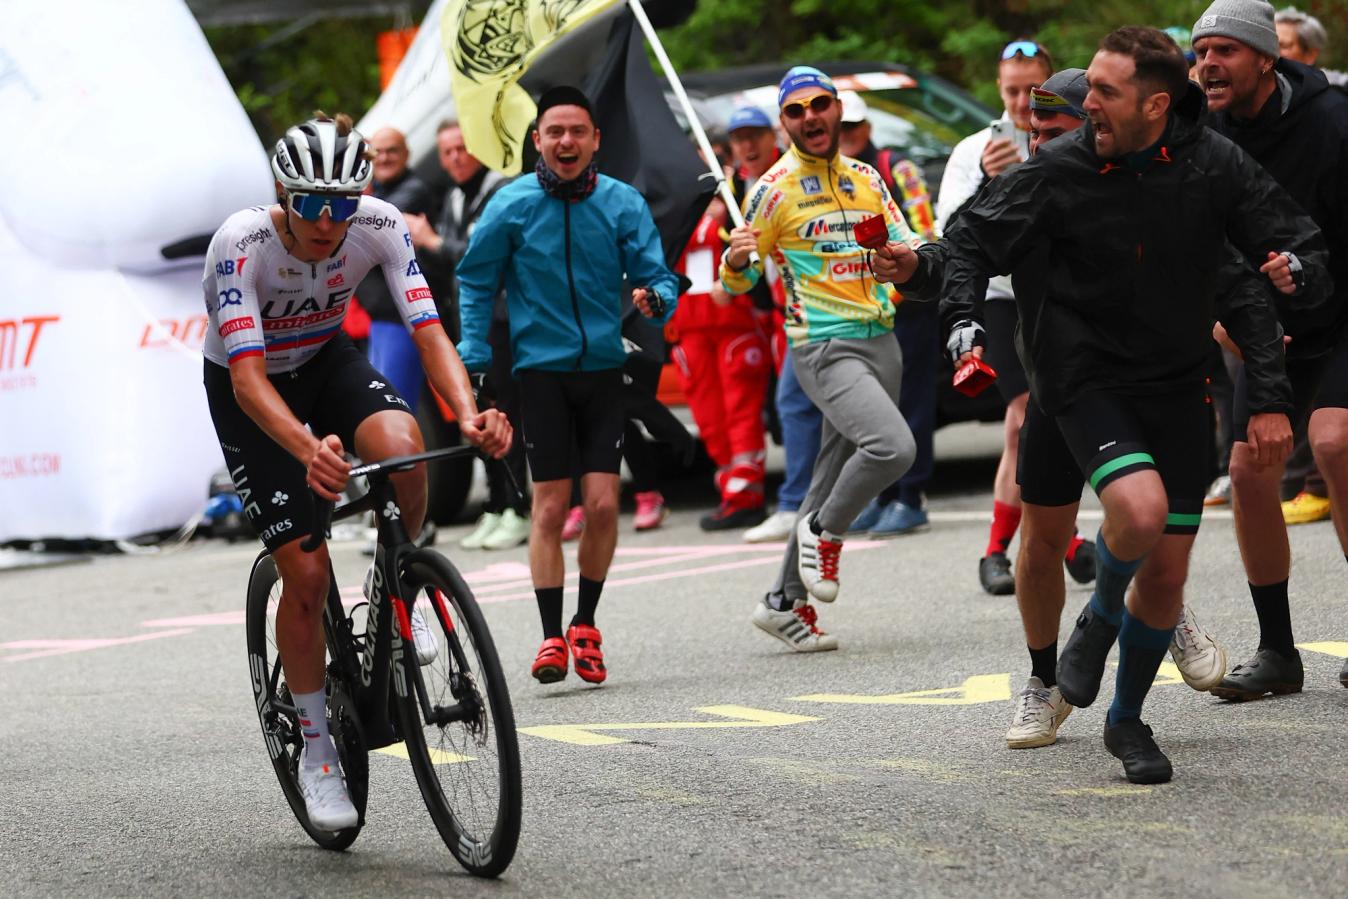 In the foreground, Tadej Pogačar rides to stage victory. In the background, a jubilant fan pays his own homage to Marco Pantani, sunglasses and all